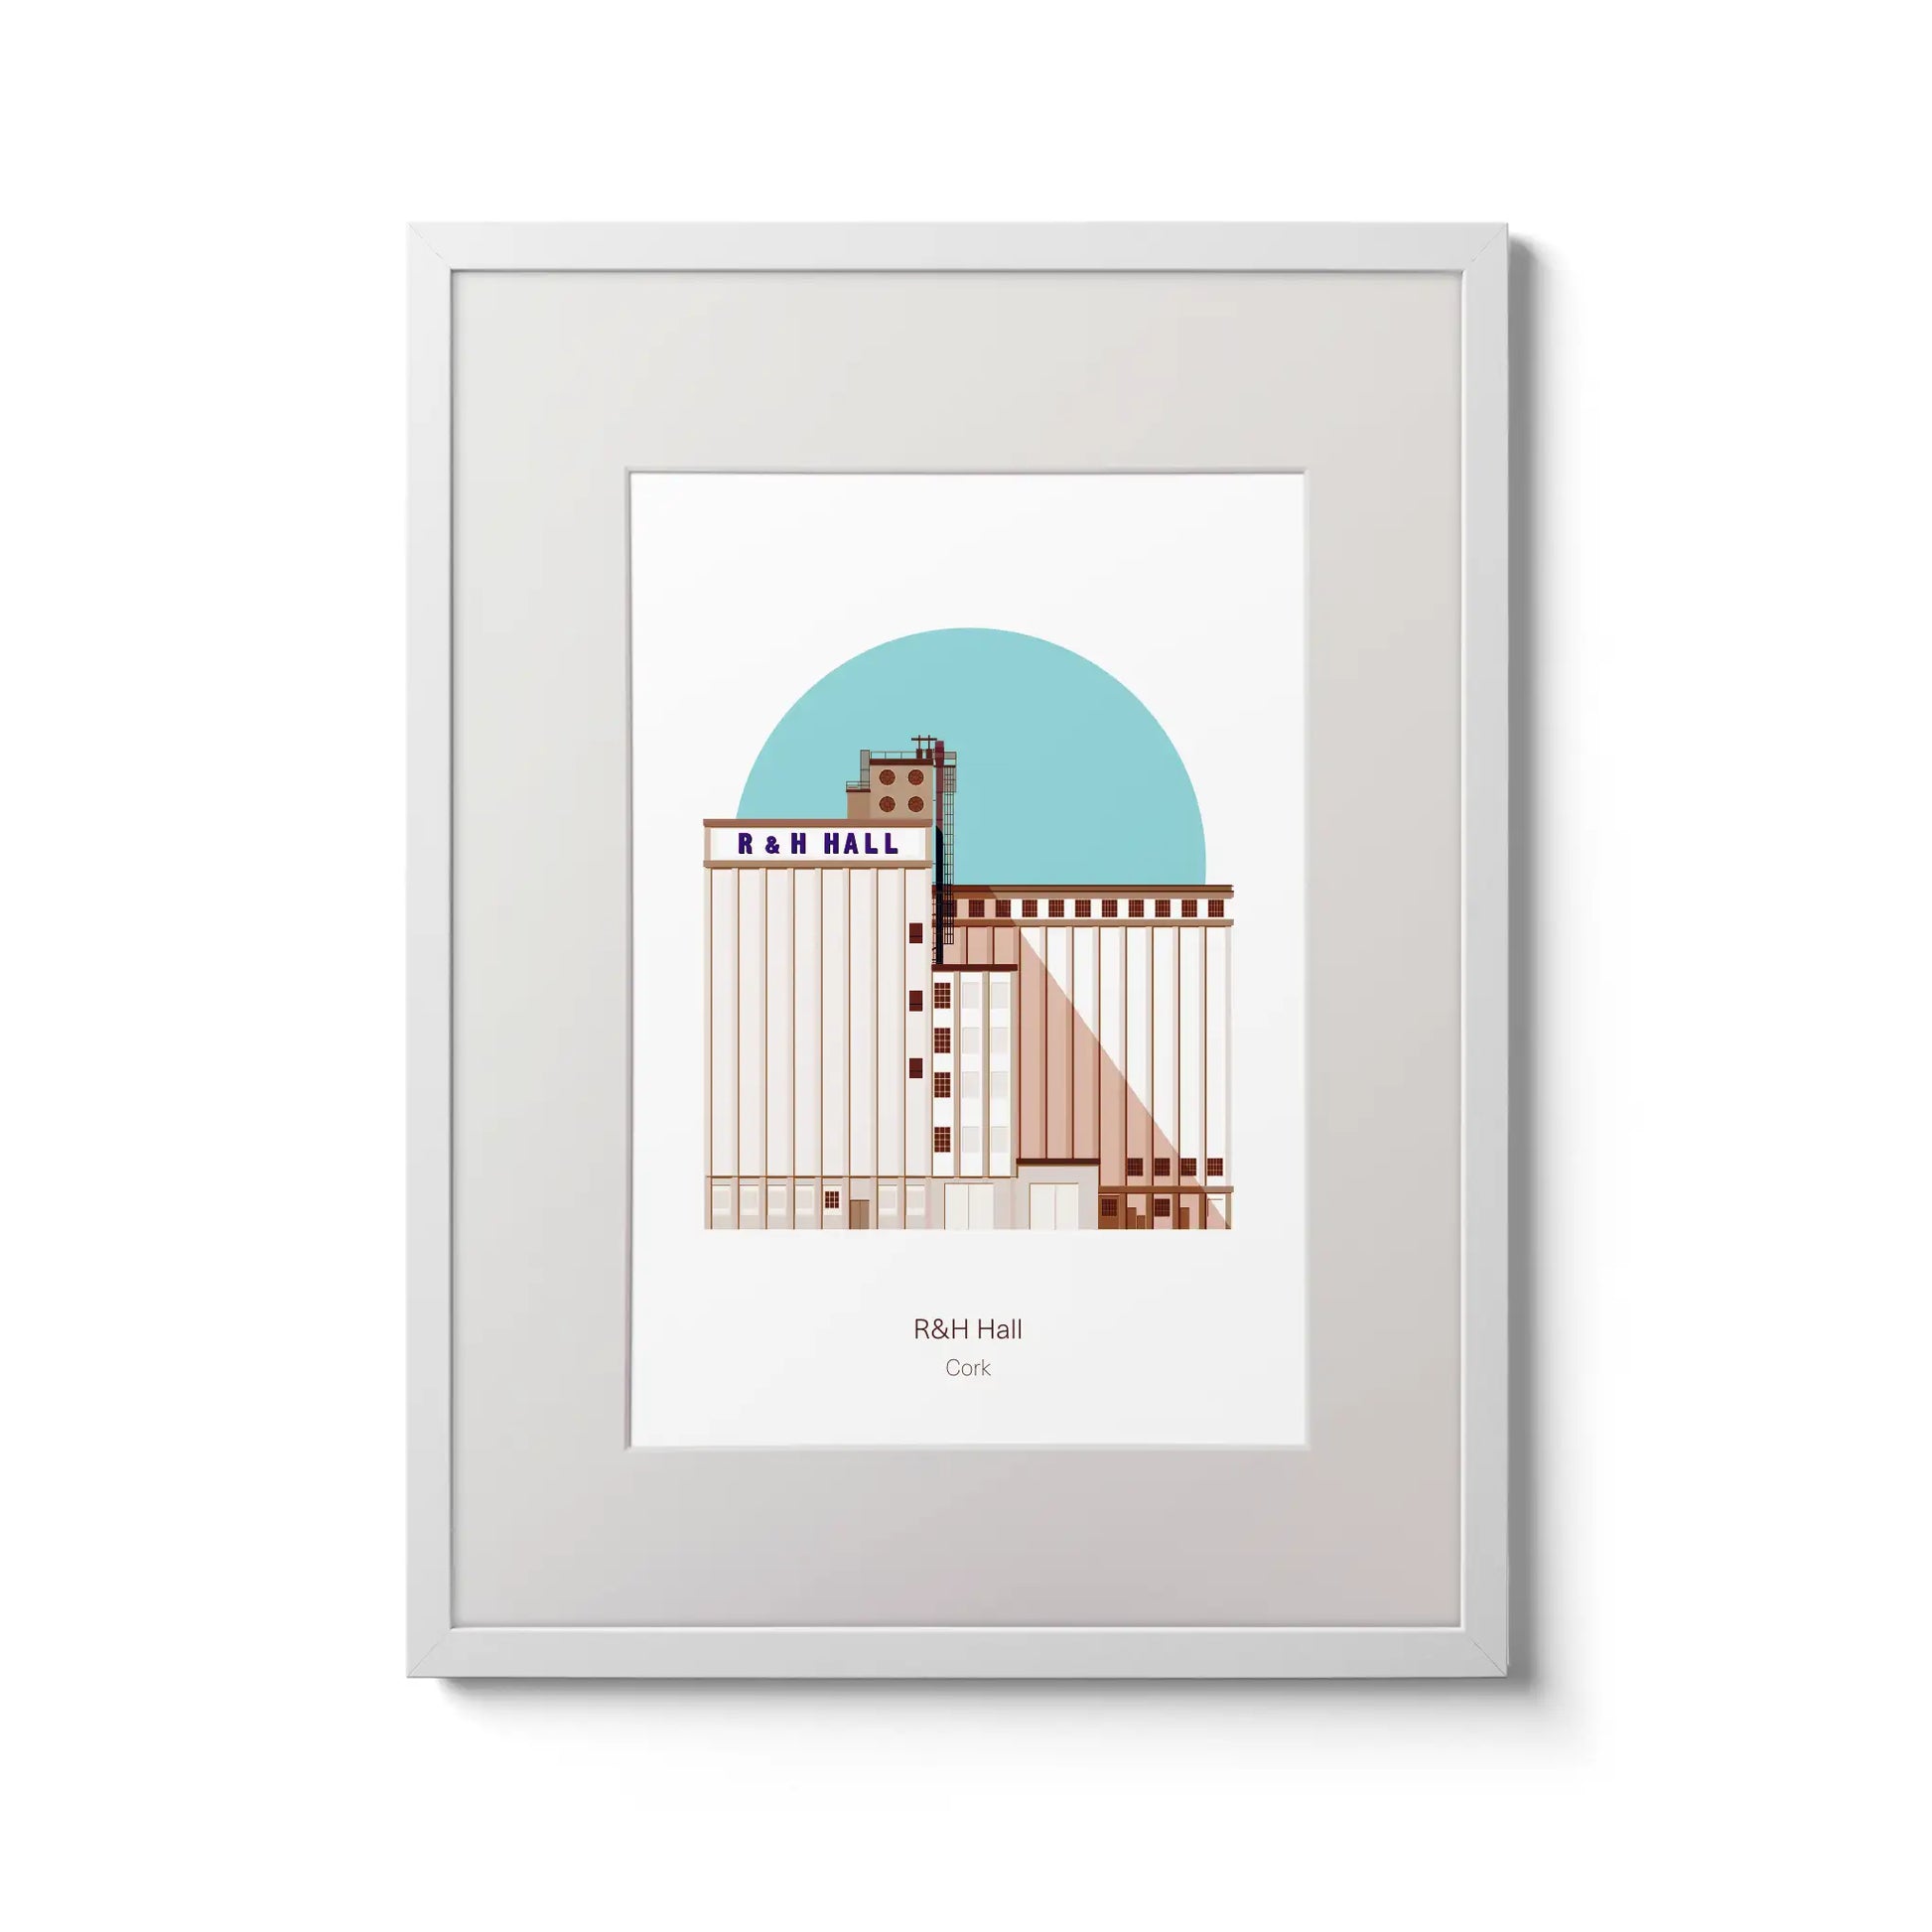 Framed contemporary art print of R&H Hall in Port of Cork, with blue background.